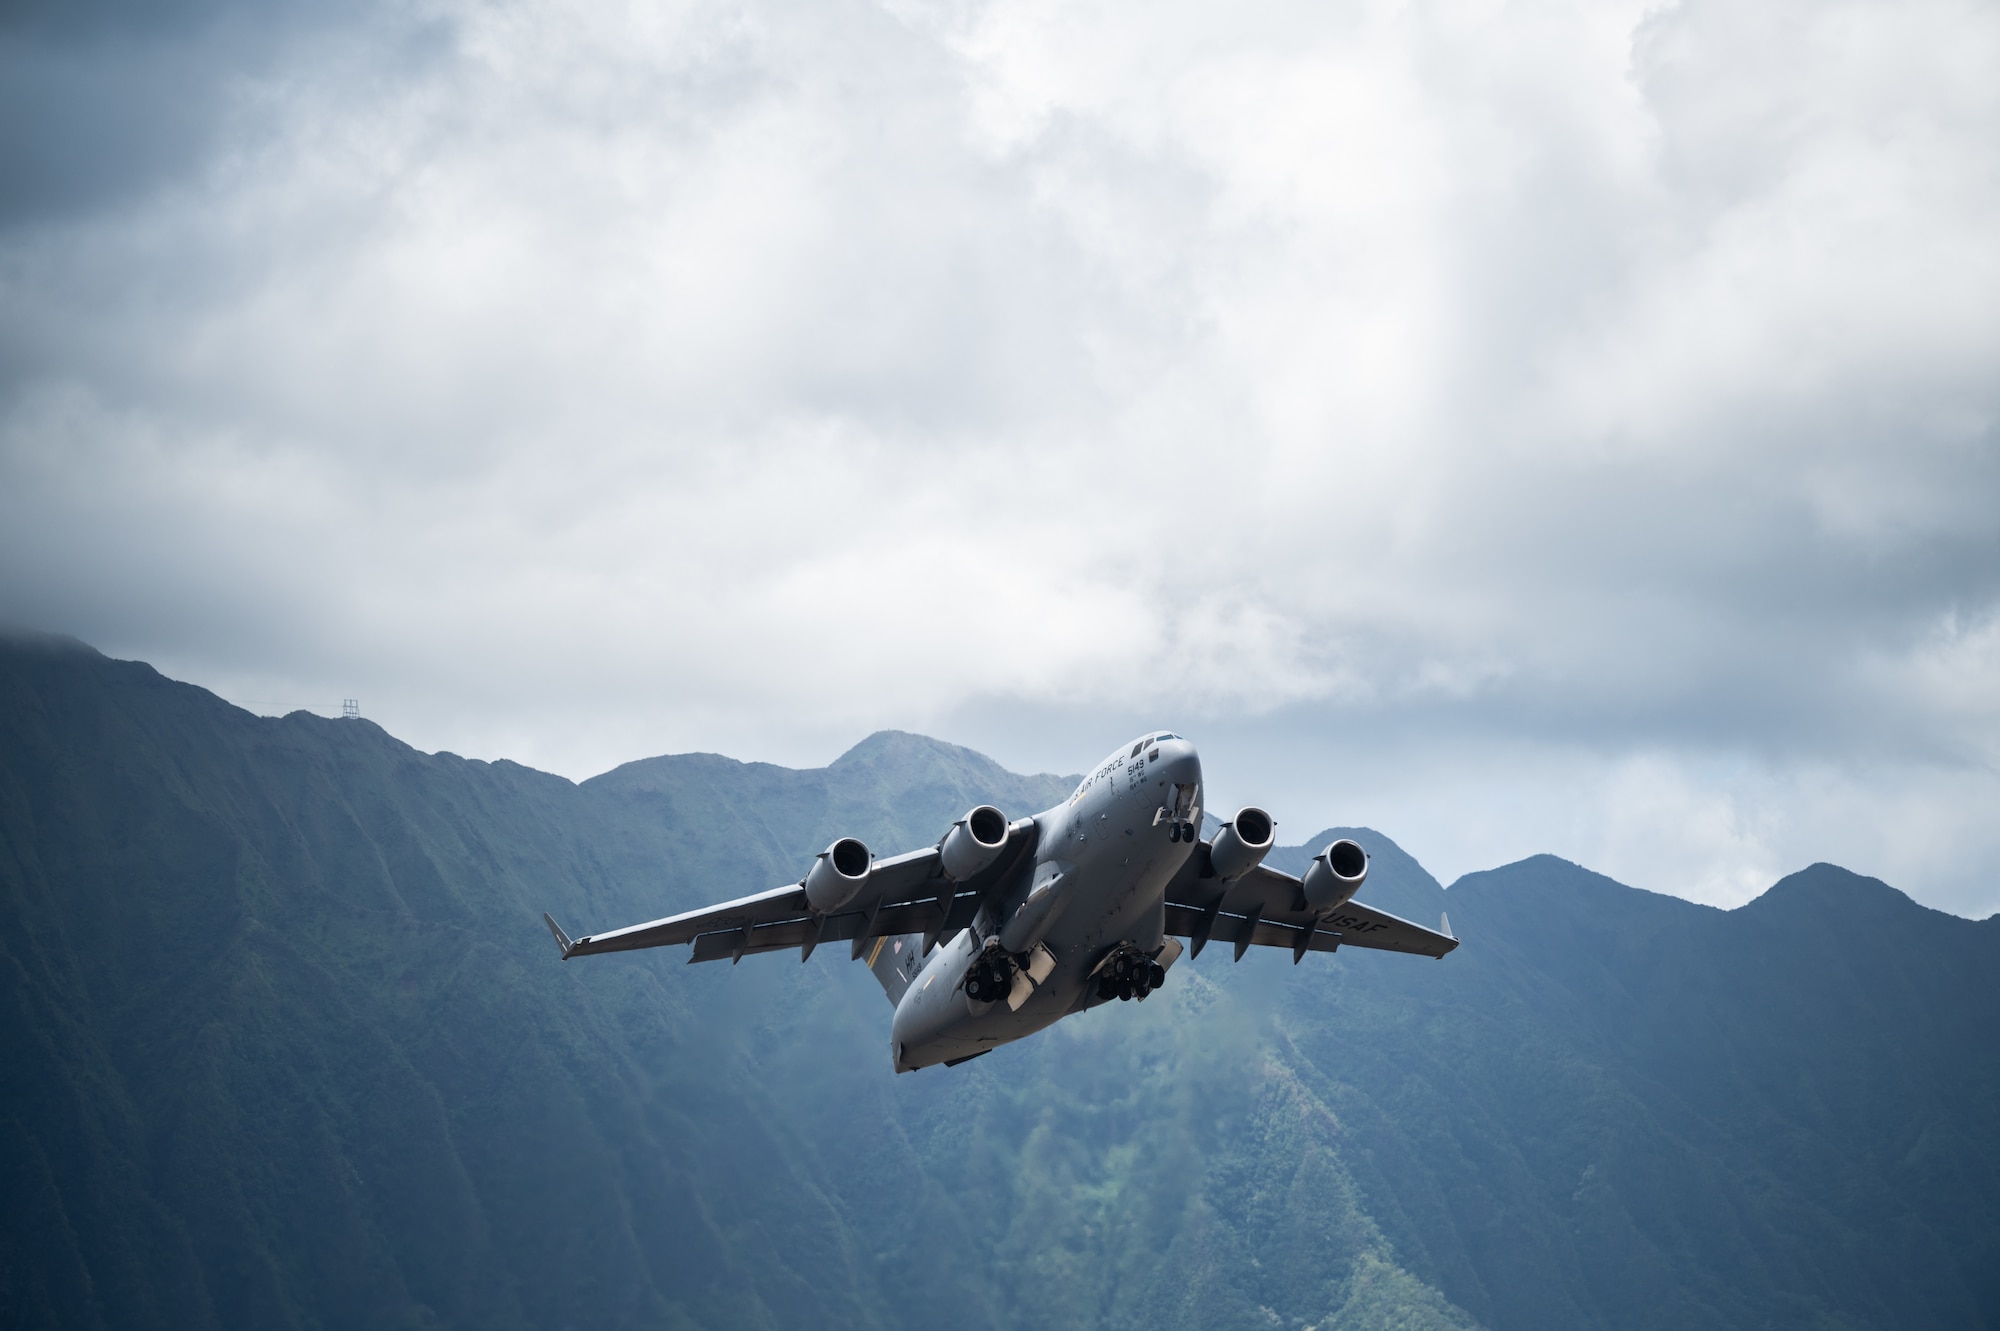 A C-17 Globemaster III assigned to the 535th Airlift Squadron takes off during the Kaneohe Bay Air Show at Marine Corps Base Hawaii, Hawaii, Aug. 12, 2022. The C-17 is capable of rapid strategic delivery of troops and cargo to main operating bases or to forwarding bases in deployment areas. (U.S. Air Force by Staff Sgt. Alan Ricker)